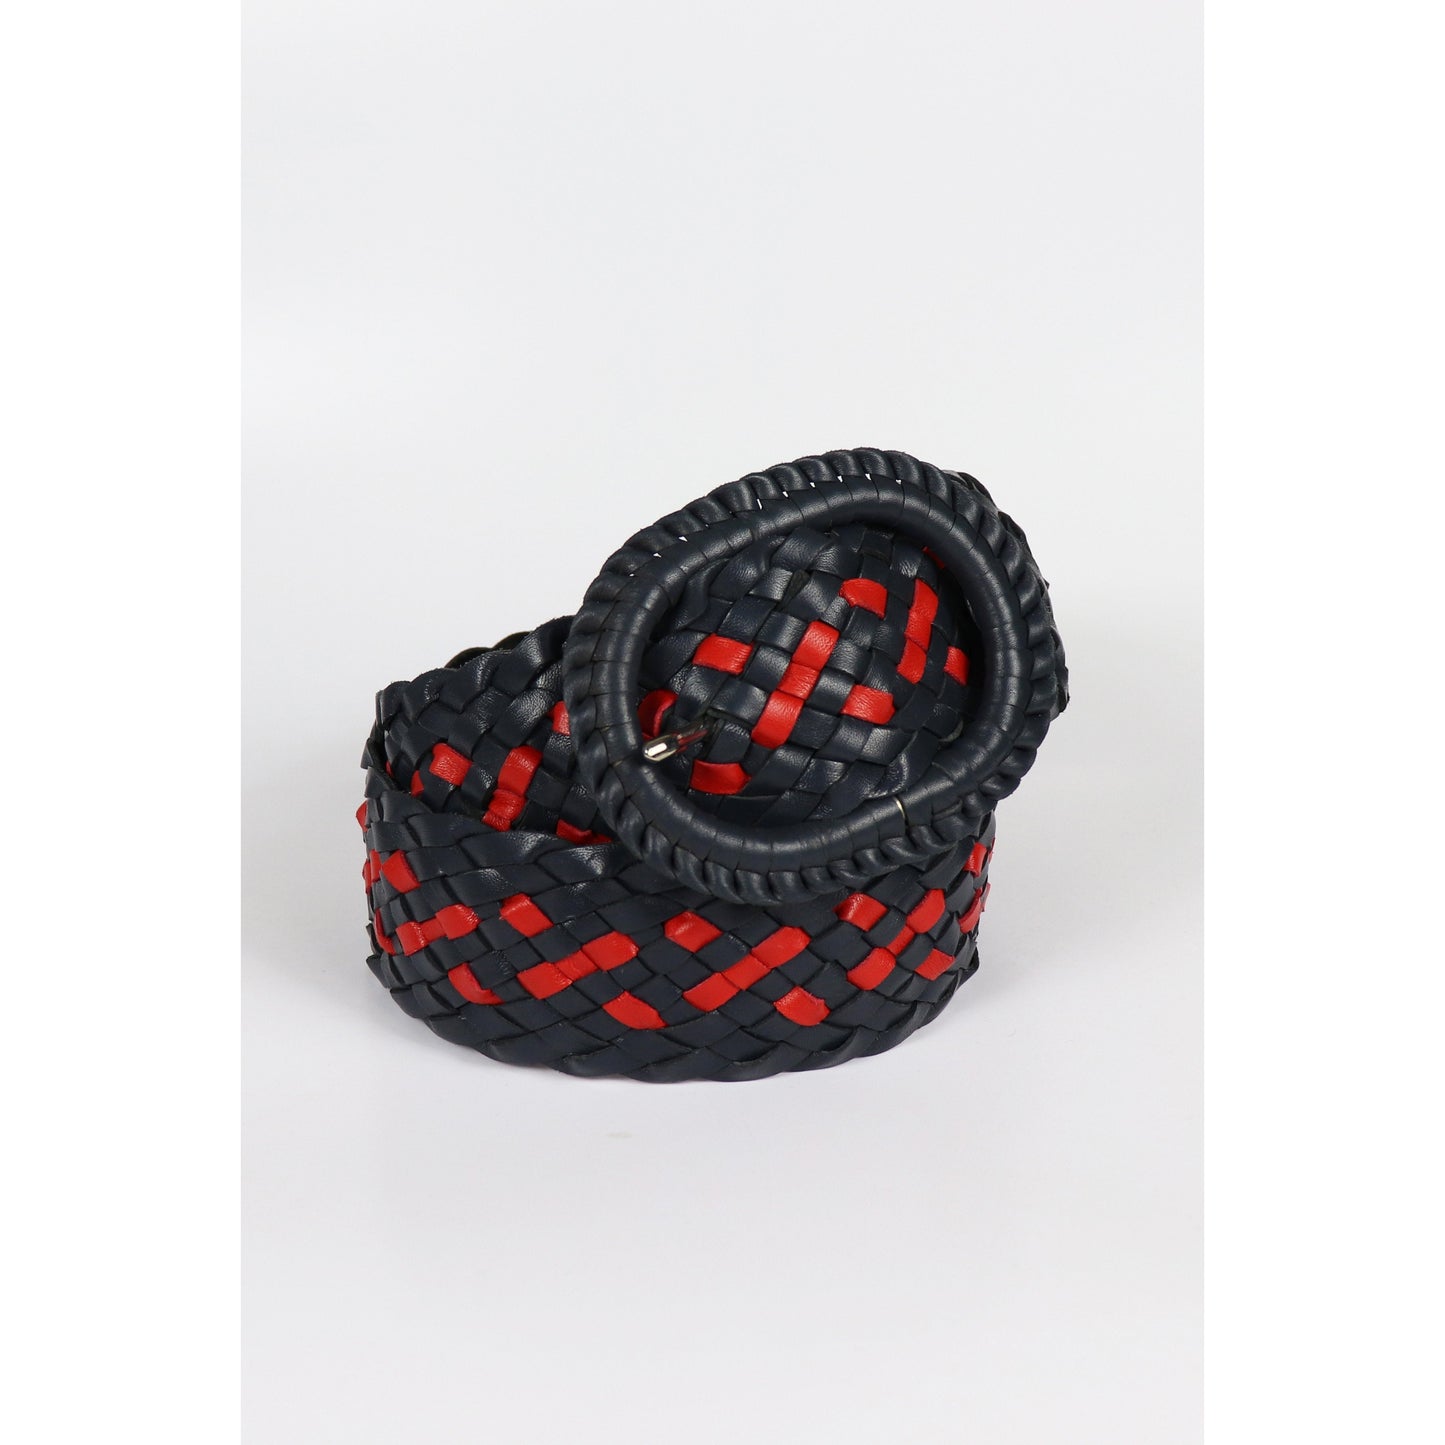 Black and red woven belts.